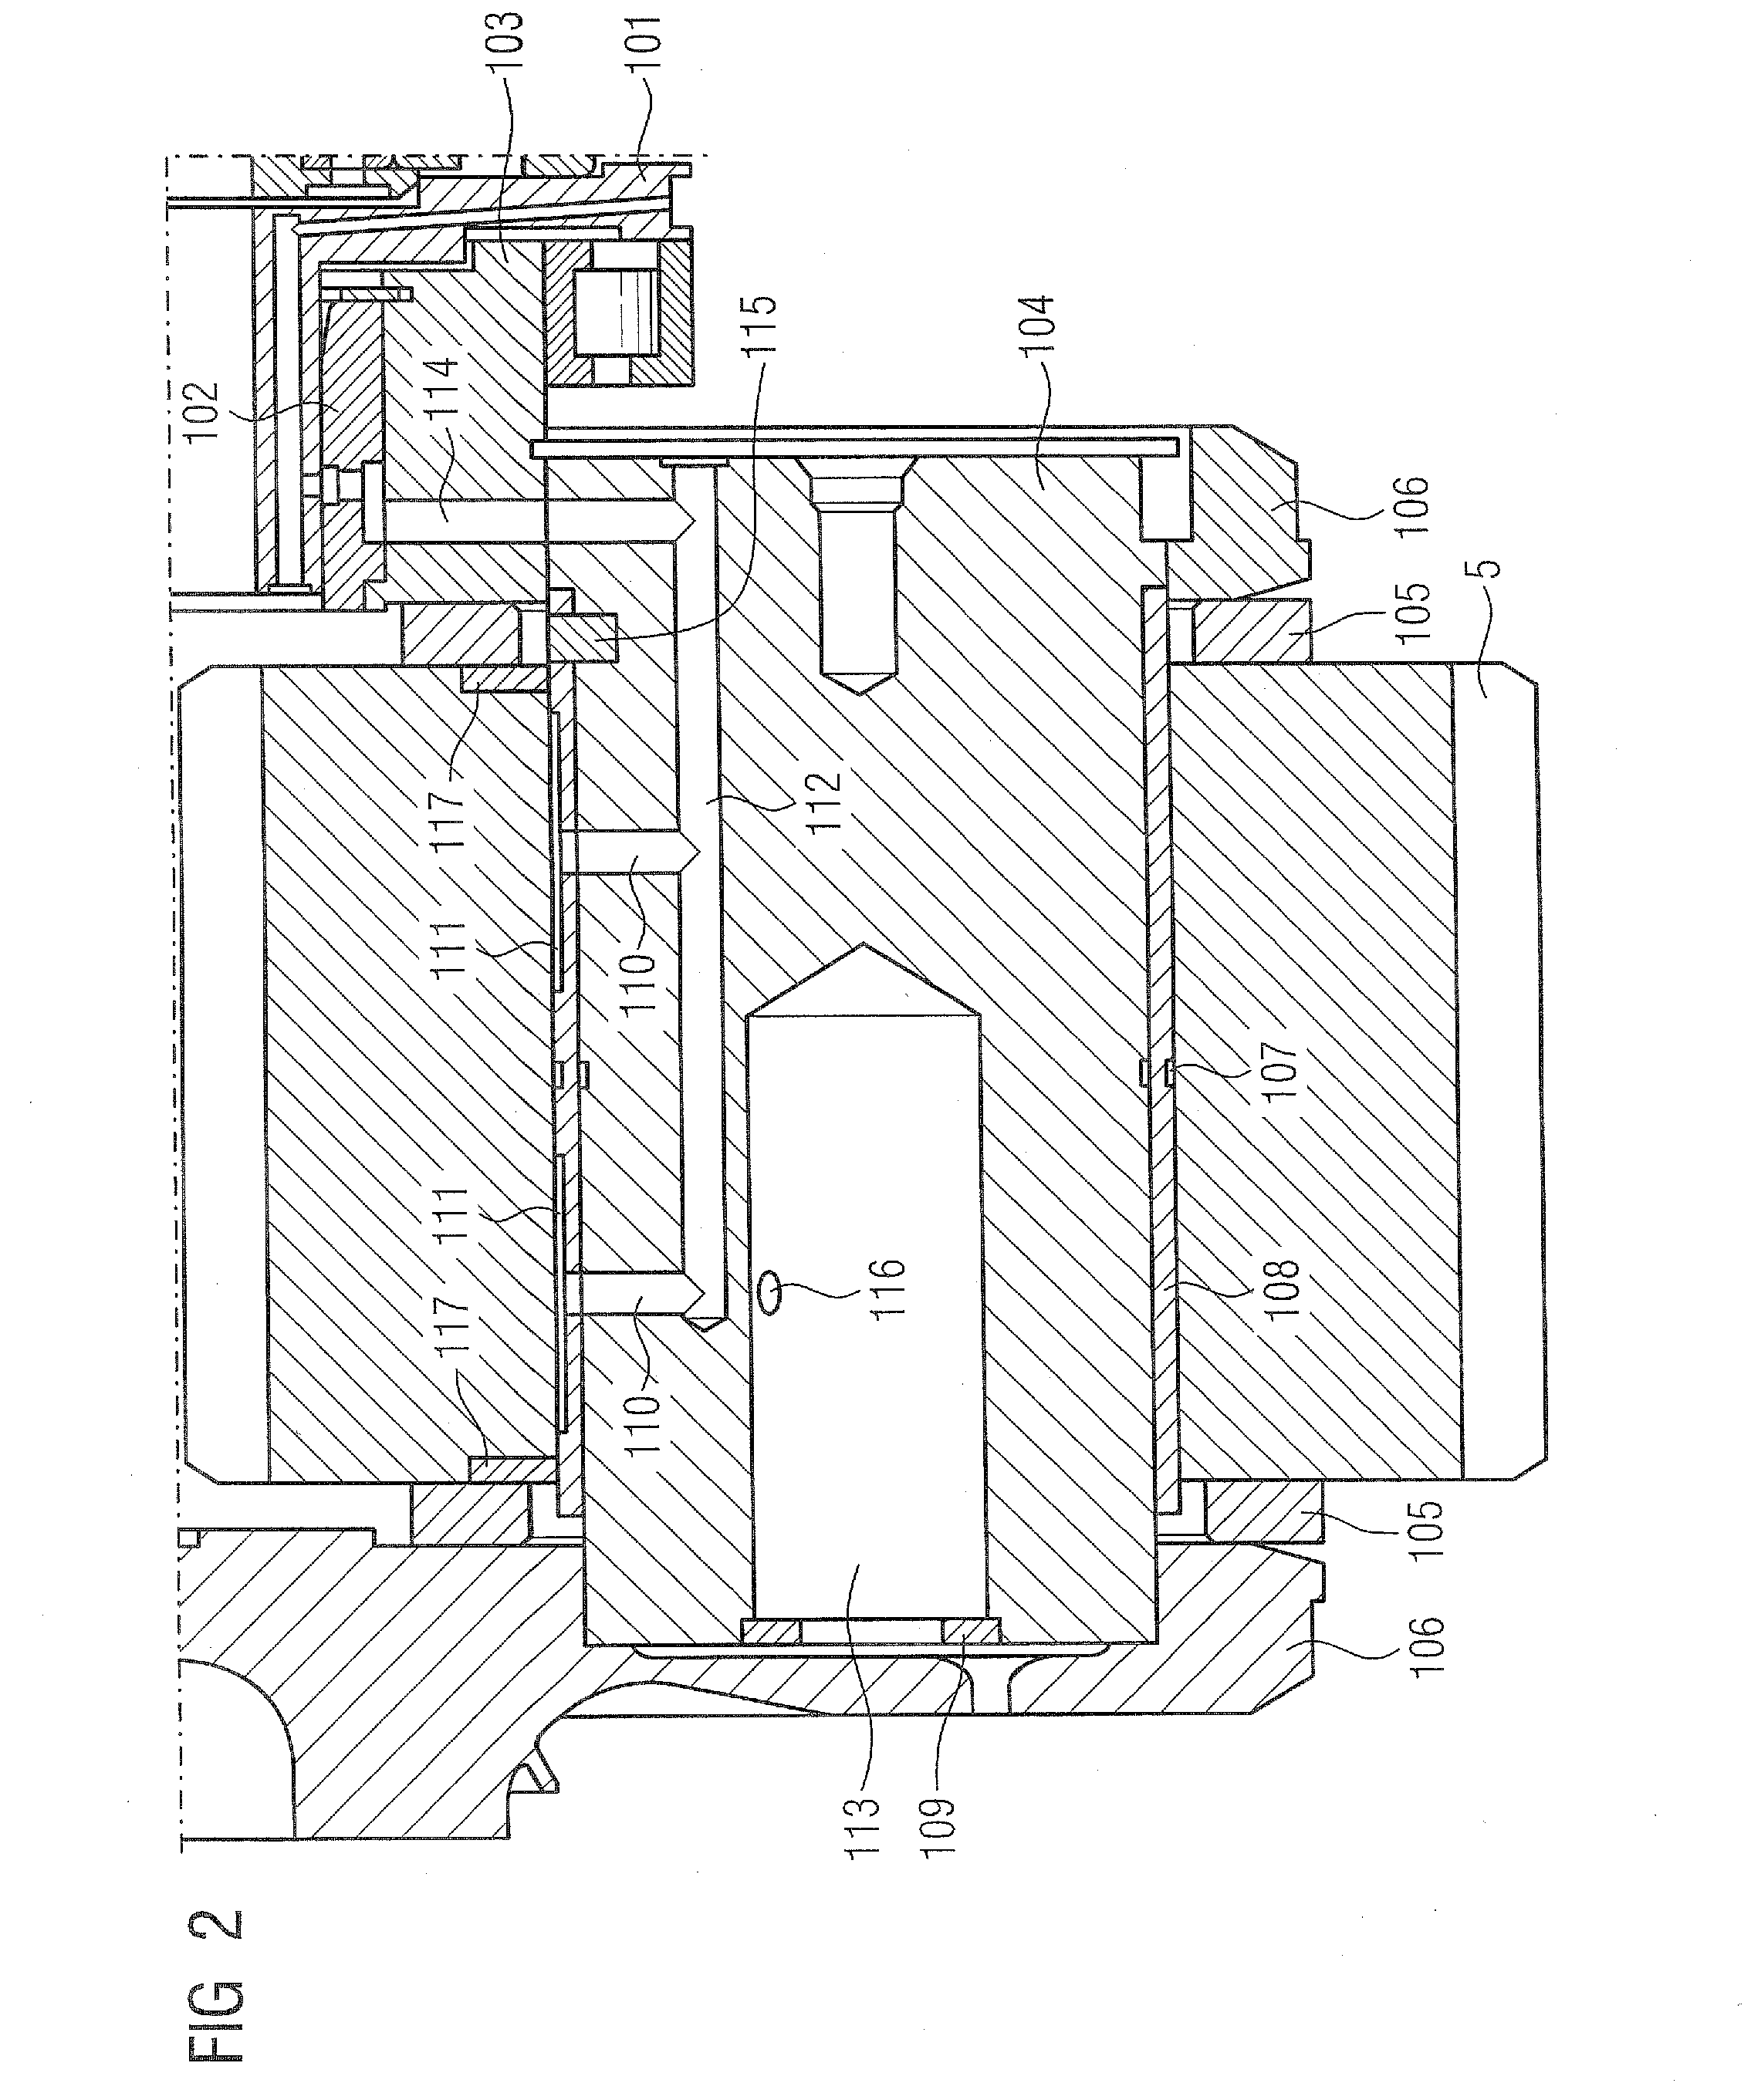 Planetary gear mechanism for a wind power plant